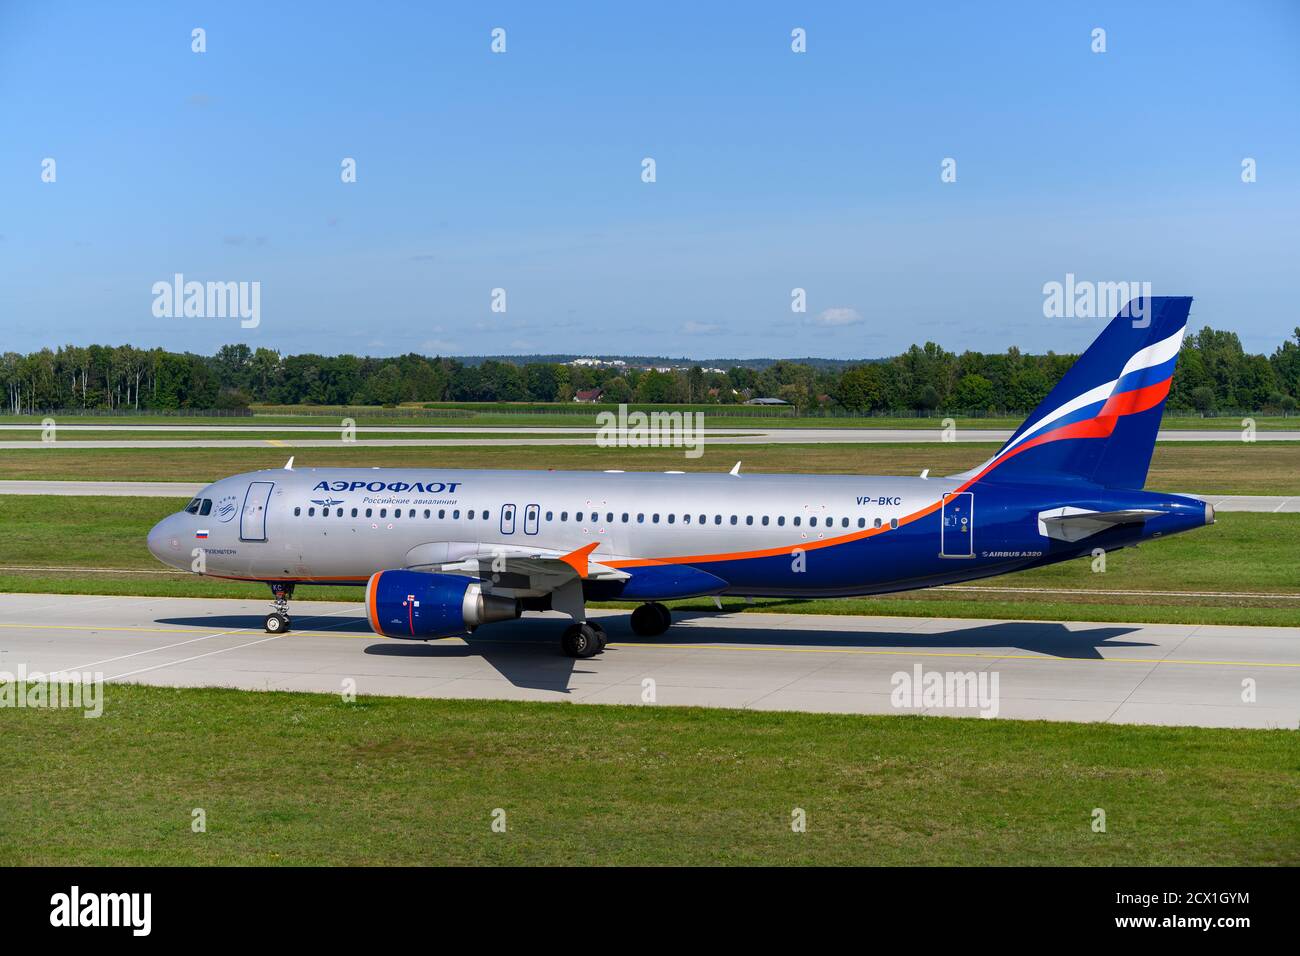 Munich, Germany - September 19. 2019 : Aeroflot - Russian Airlines Airbus A320-214 with the aircraft registration VP-BKC  is taxiing for take off on t Stock Photo